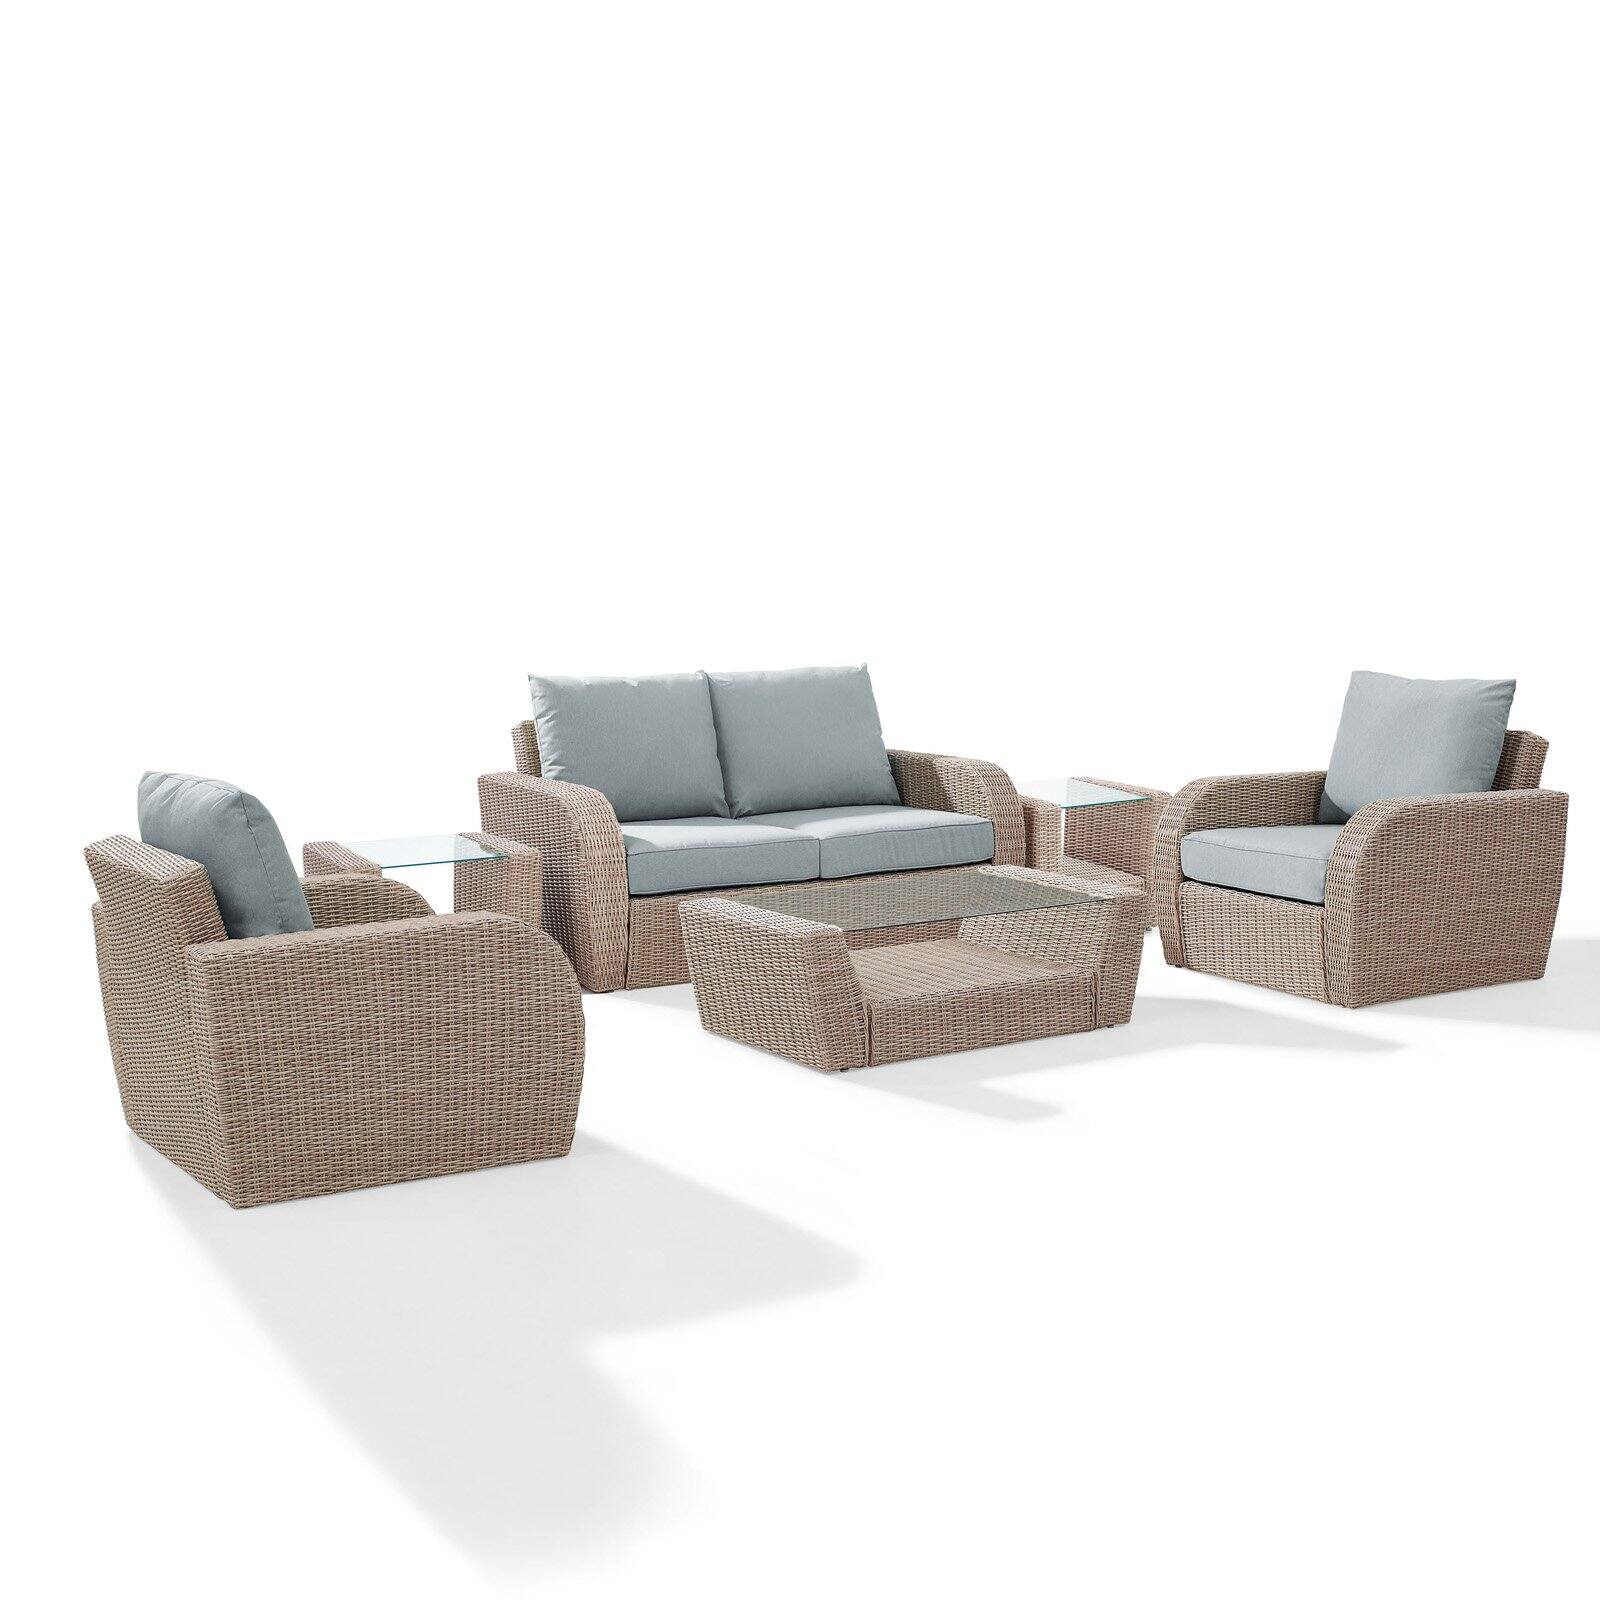 Crosley Furniture St Augustine 6 Pc Outdoor Wicker Seating Set With Mist Cushion - Loveseat, Two Chairs, Two Side Tables, Coffee Table - image 4 of 11